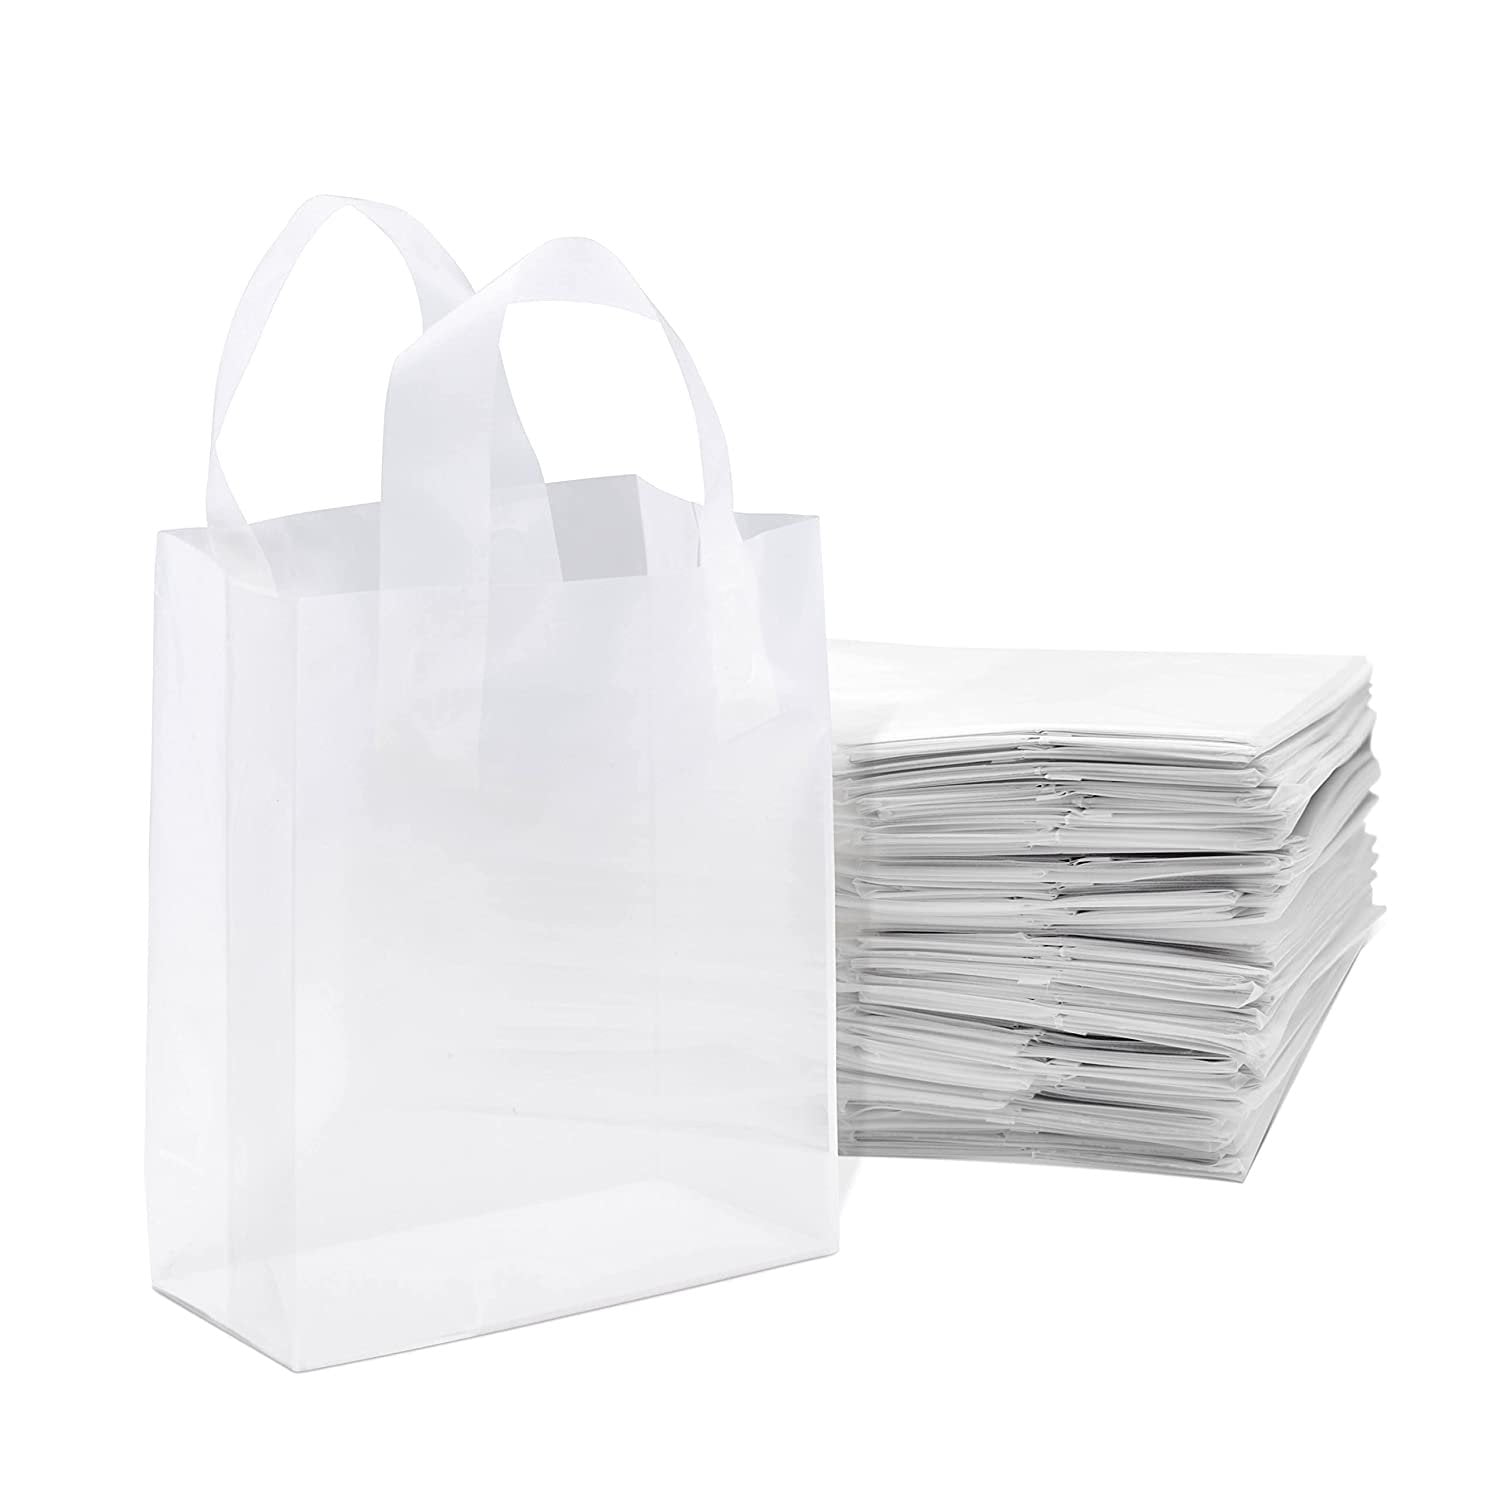 200x New White Patch Handle Carrier Gift Retail Shopping Plastic Bags 10"X12"+4 